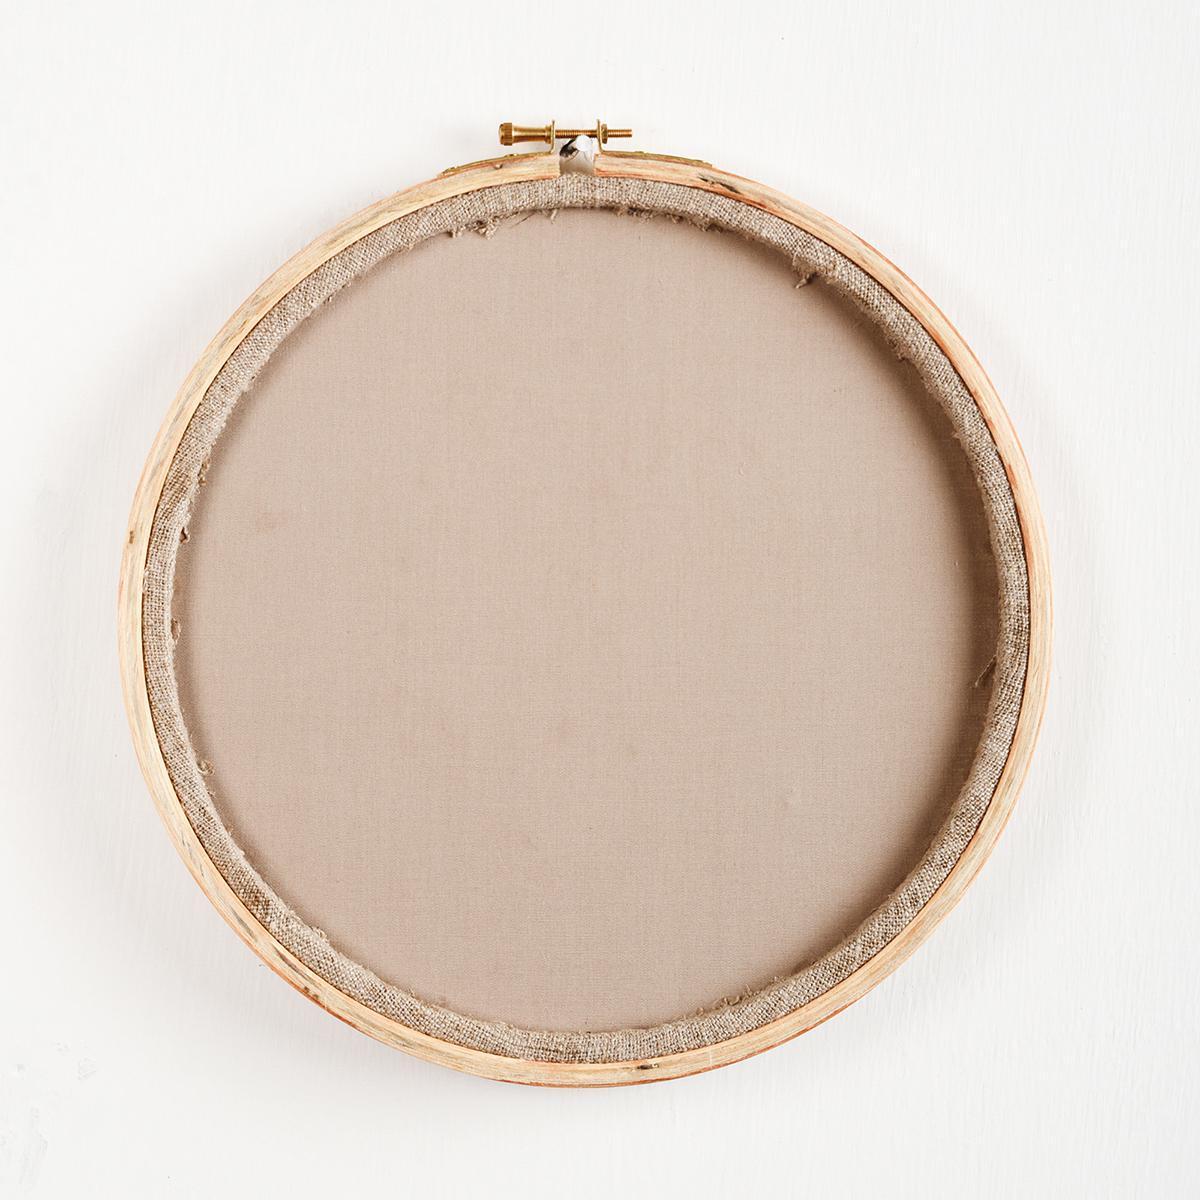 Udhayam Wooden Embroidery Hoop Ring Frame(5,6,8,12 inches) Set of 4 pcs  5ply (Brass Screw) (golden color)Cross Stitch Craft, Sewing Tool,  Embroidery making. Embroidery Frame Price in India - Buy Udhayam Wooden  Embroidery